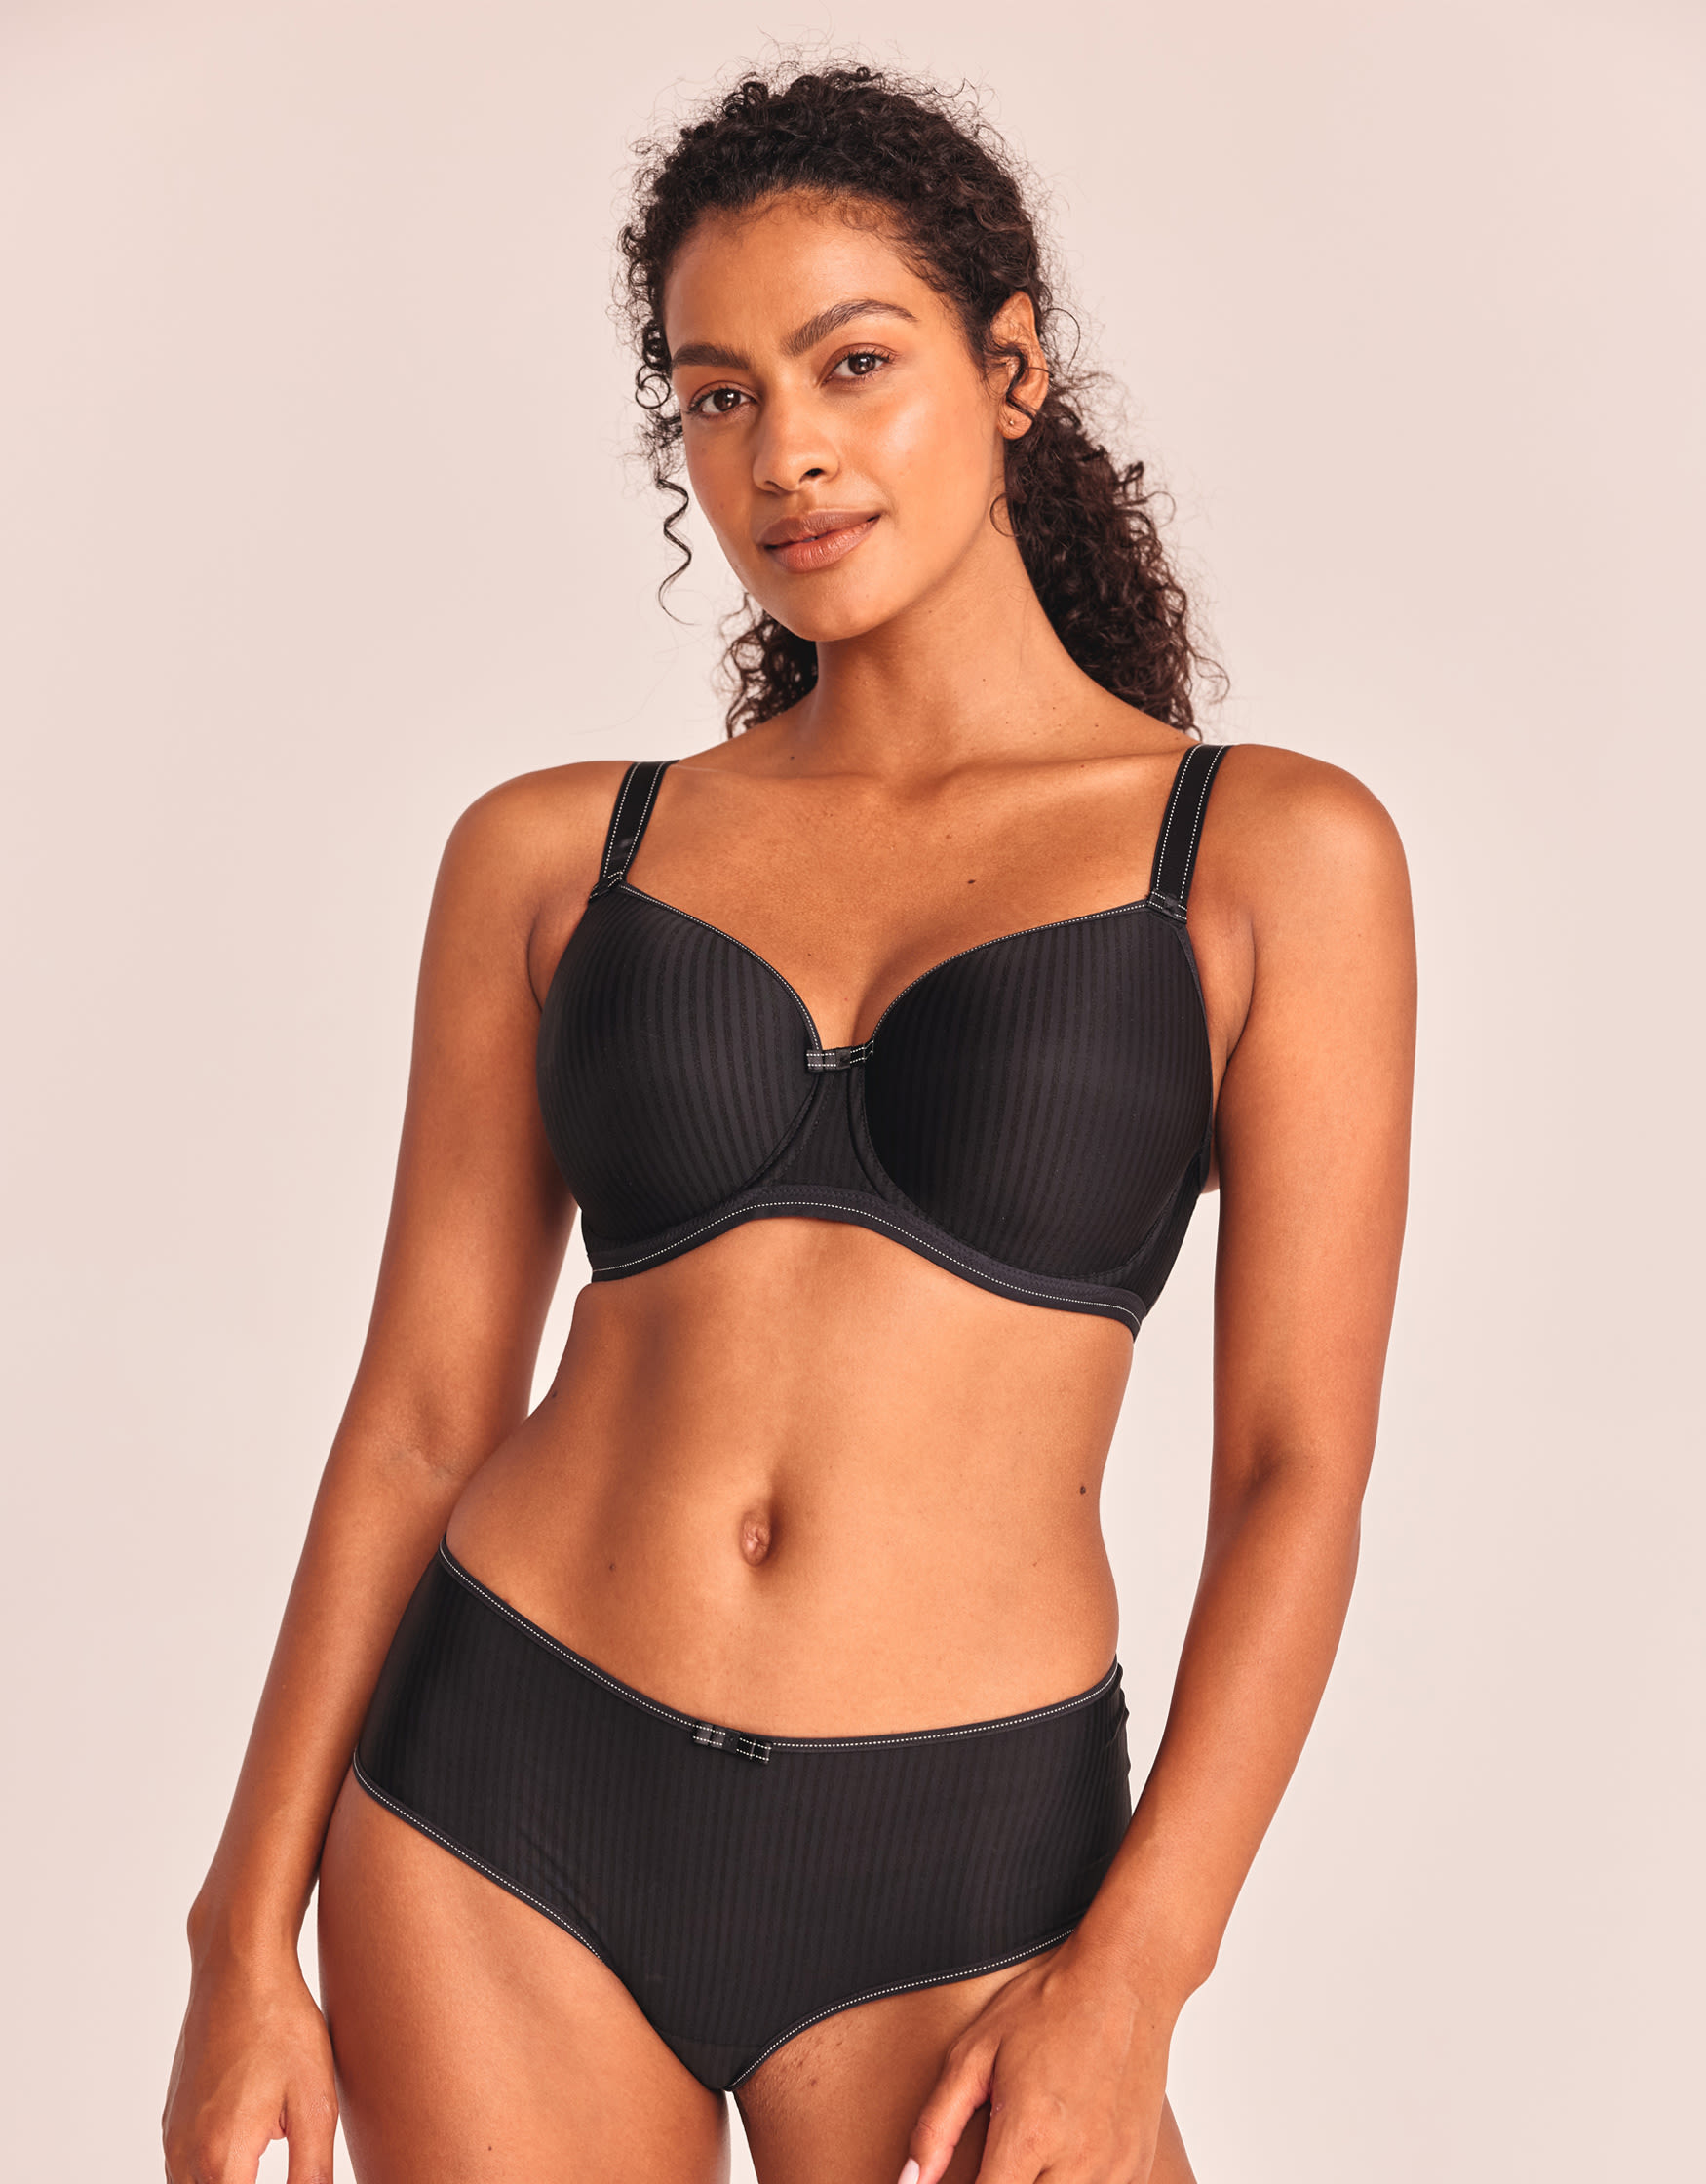 Piccinino - New arrivals ☀️ The freya collection with bra sized swimwear up  to G cup 🙌 . . . . . . . . #piccinino #swimwear #brasized #uptoGcup  #trends #wearpiccinino #summer18